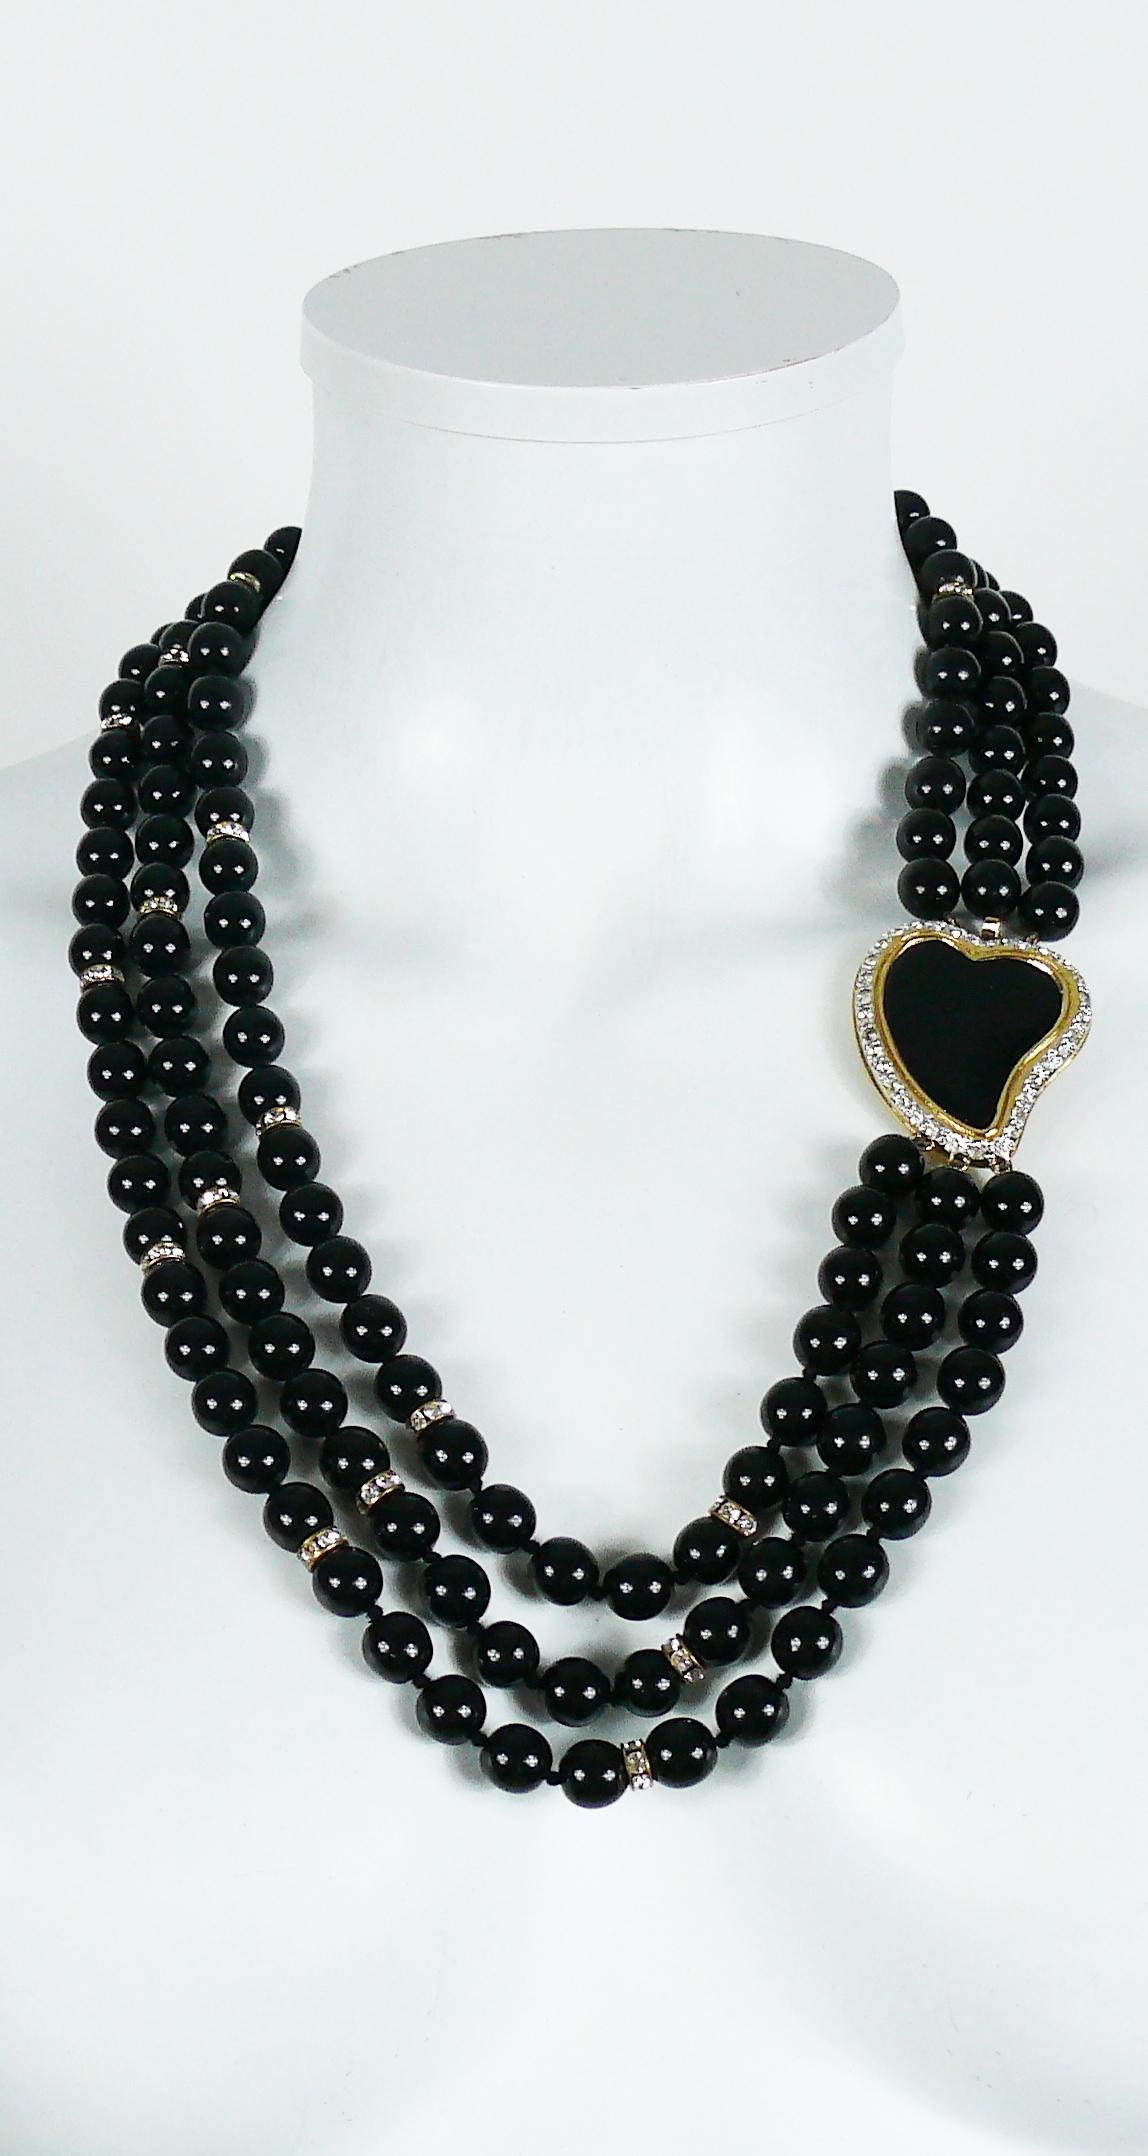 YVES SAINT LAURENT vintage three tiered black bead necklace embellished with clear crystal rondelles and a jewelled black enamel heart clasp.

Embossed YSL.

Indicative measurements : length approx. 61.5 cm (24.21 inches) / heart approx. 3.5 cm x 4